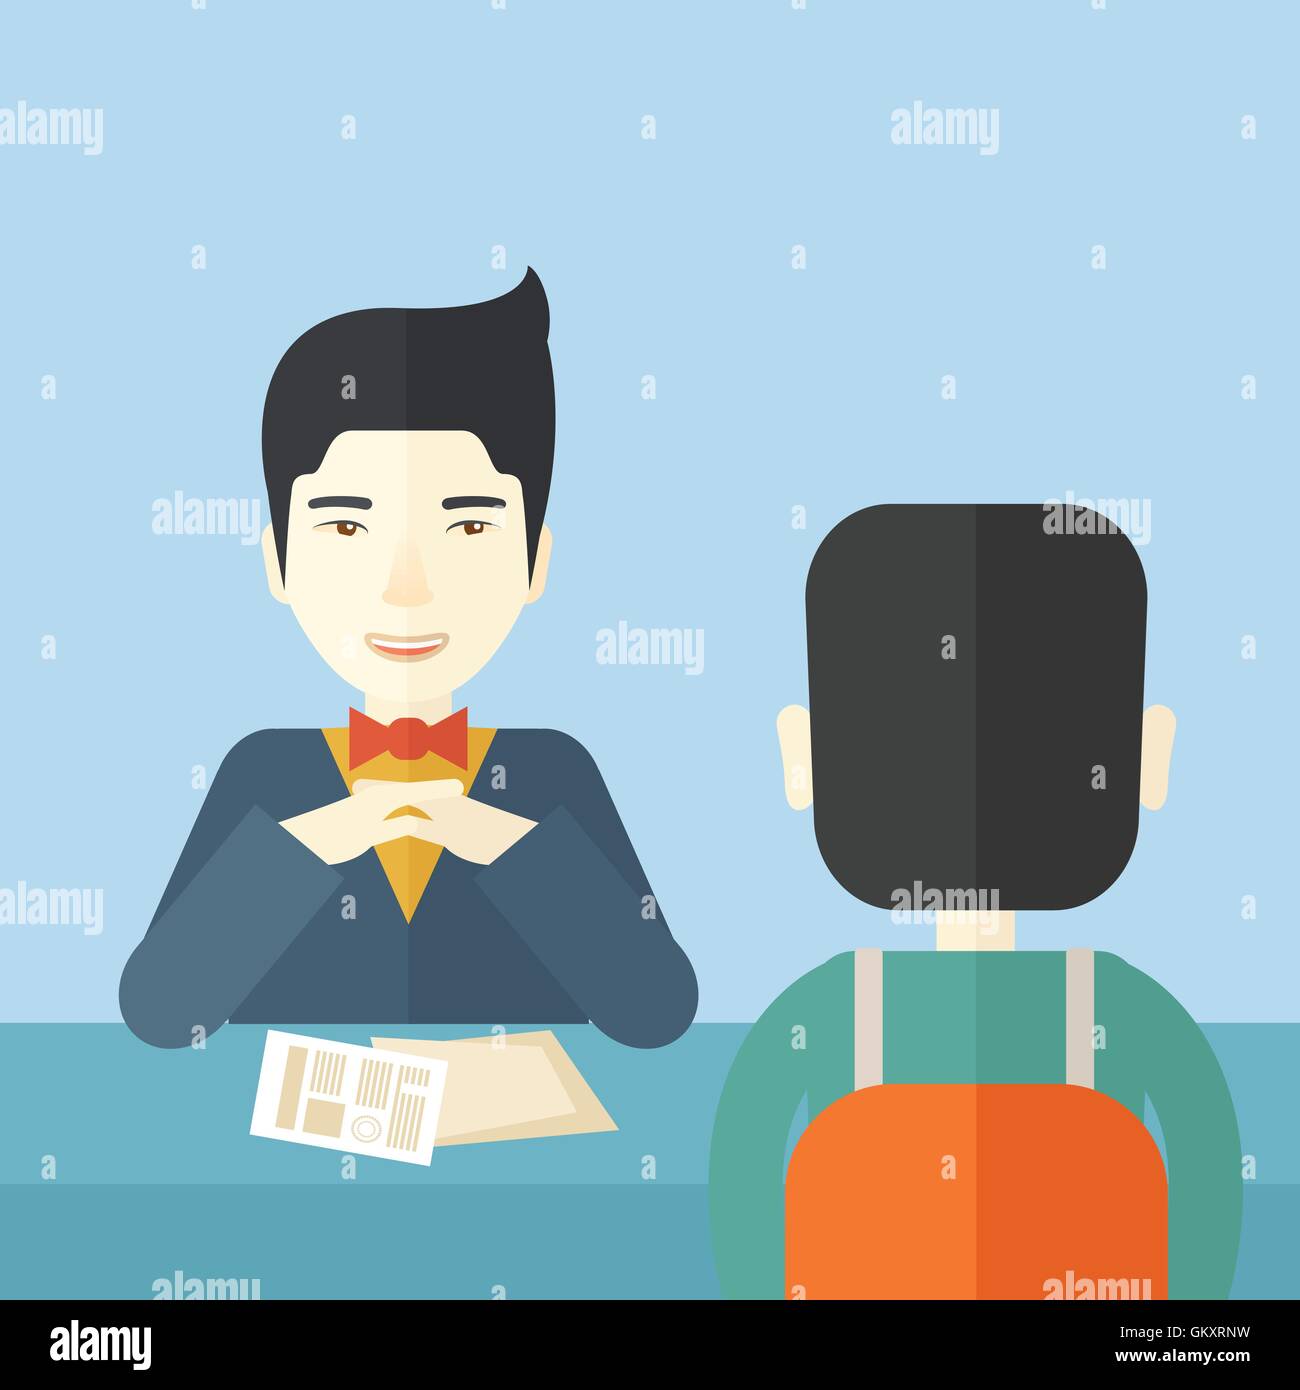 Smiling human resource manager. Stock Vector